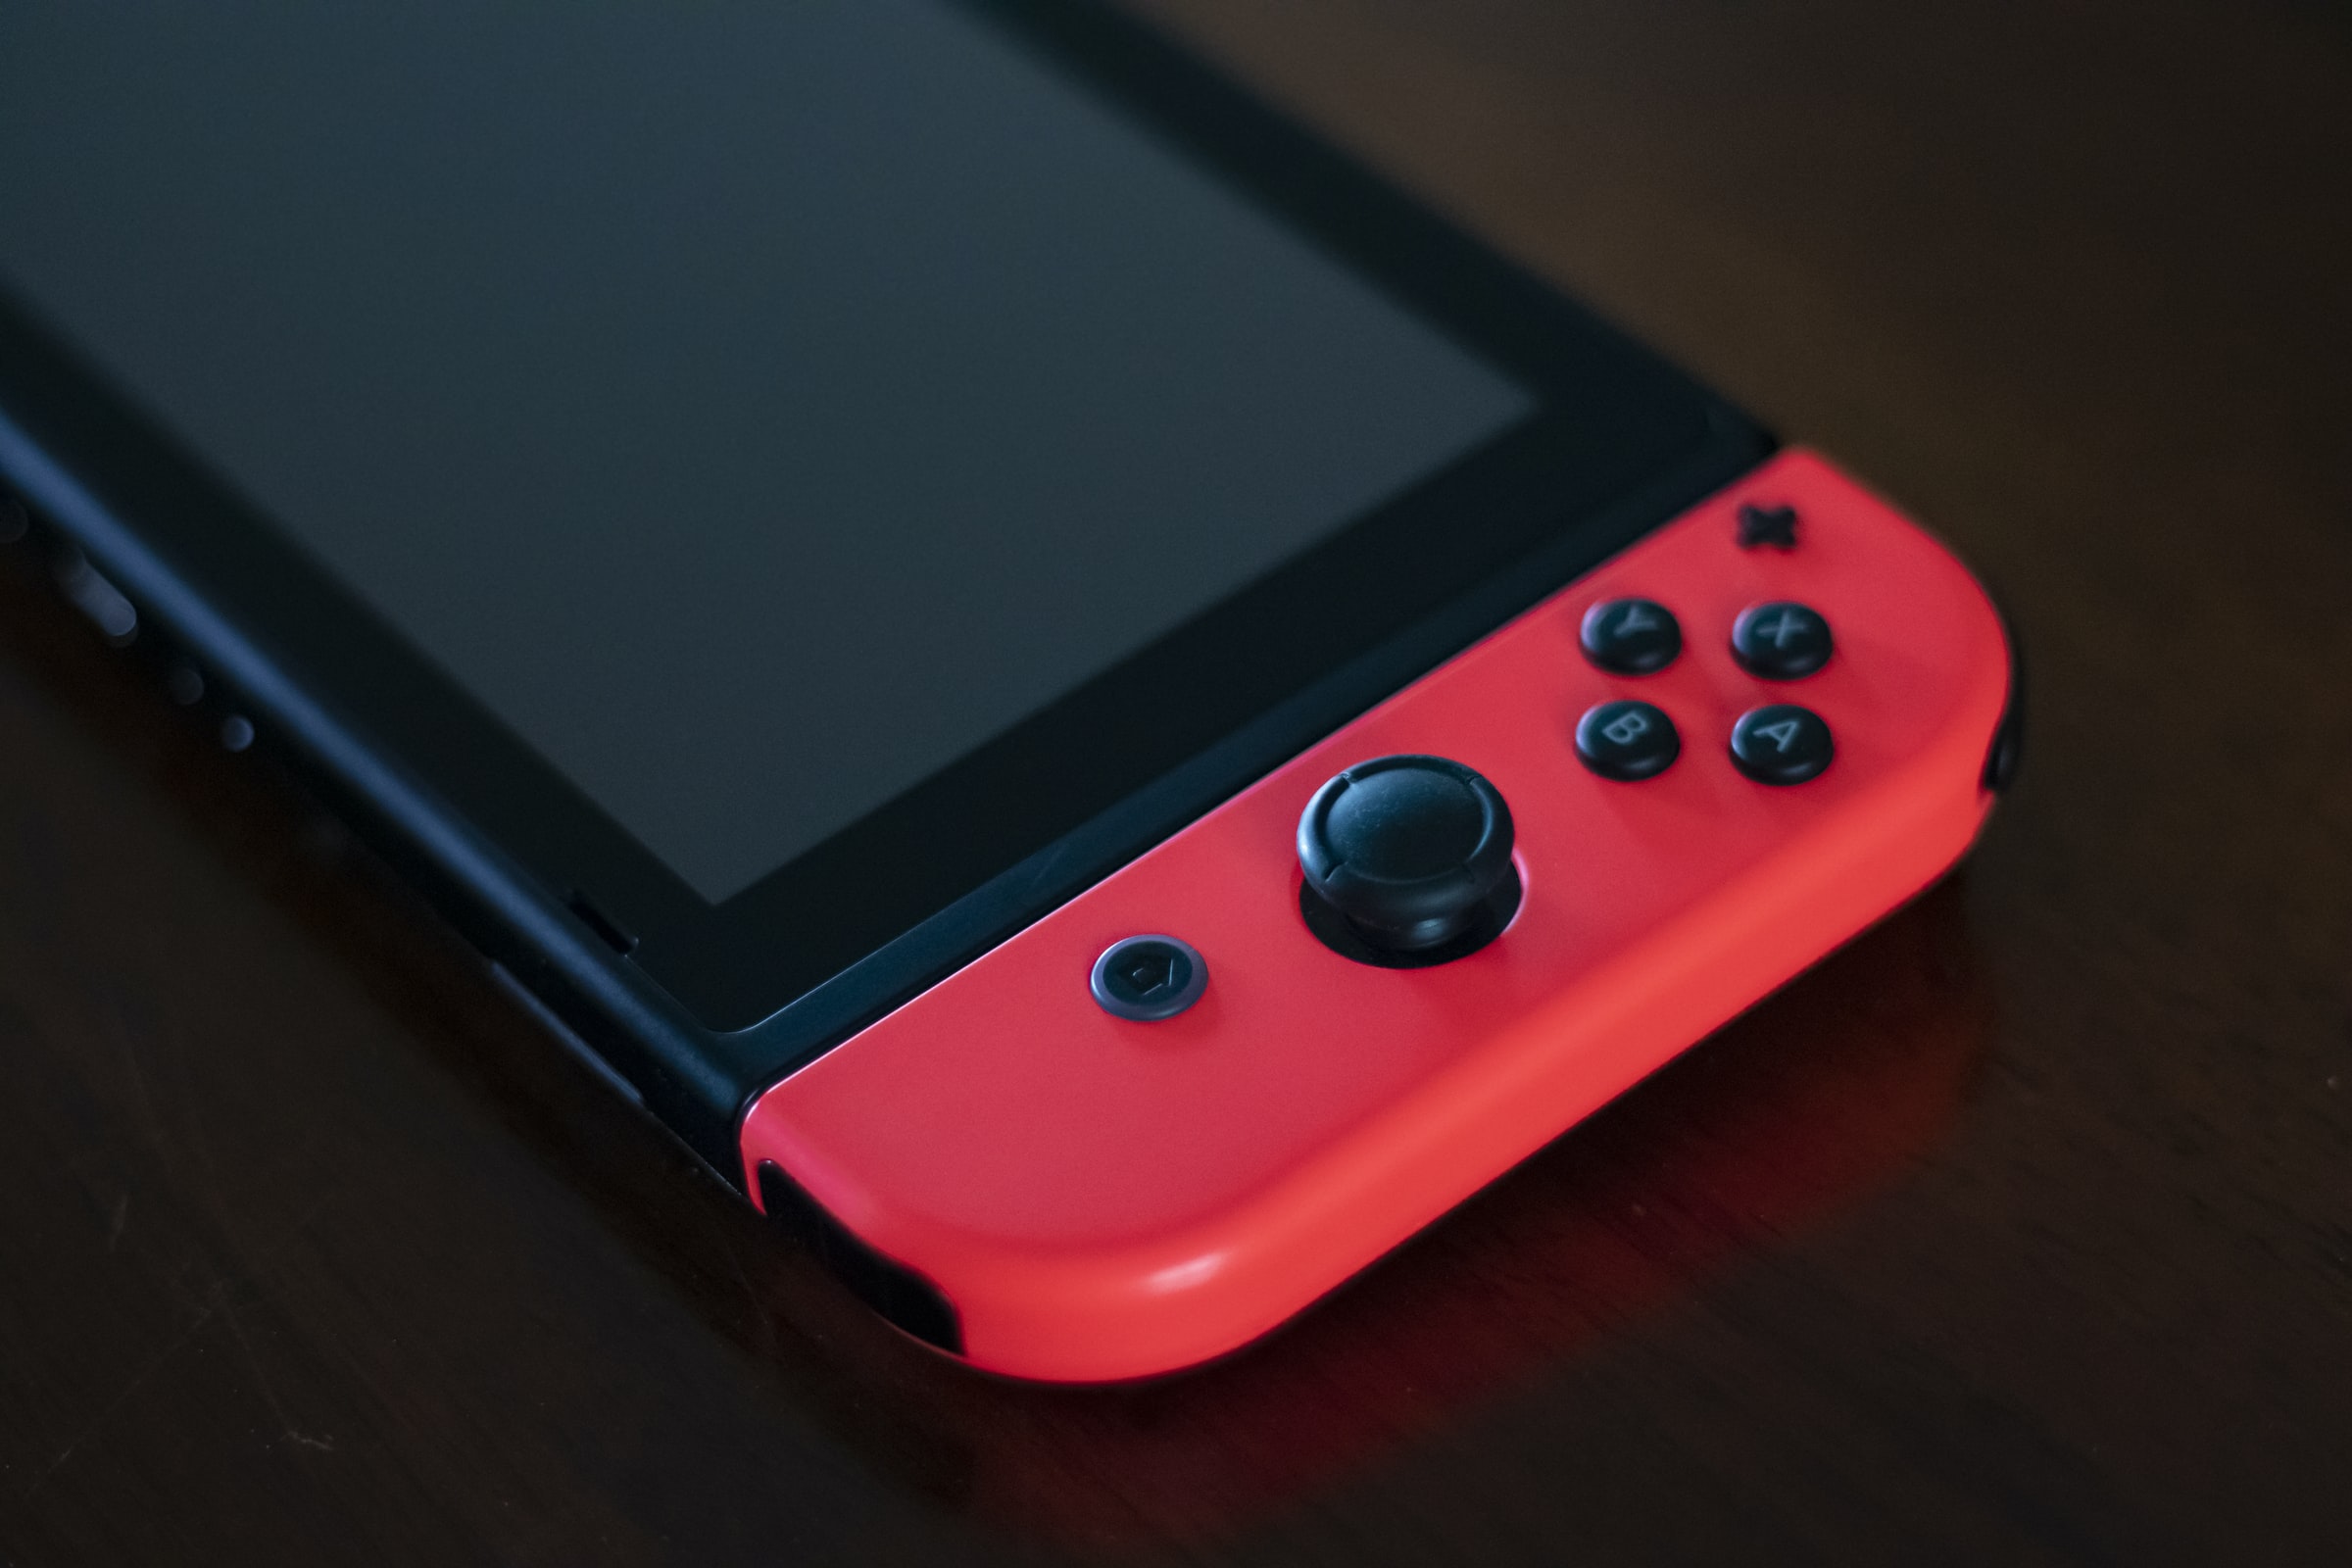 Nintendo Switch Two-Factor Security: How To Turn It On (And Why) - SlashGear